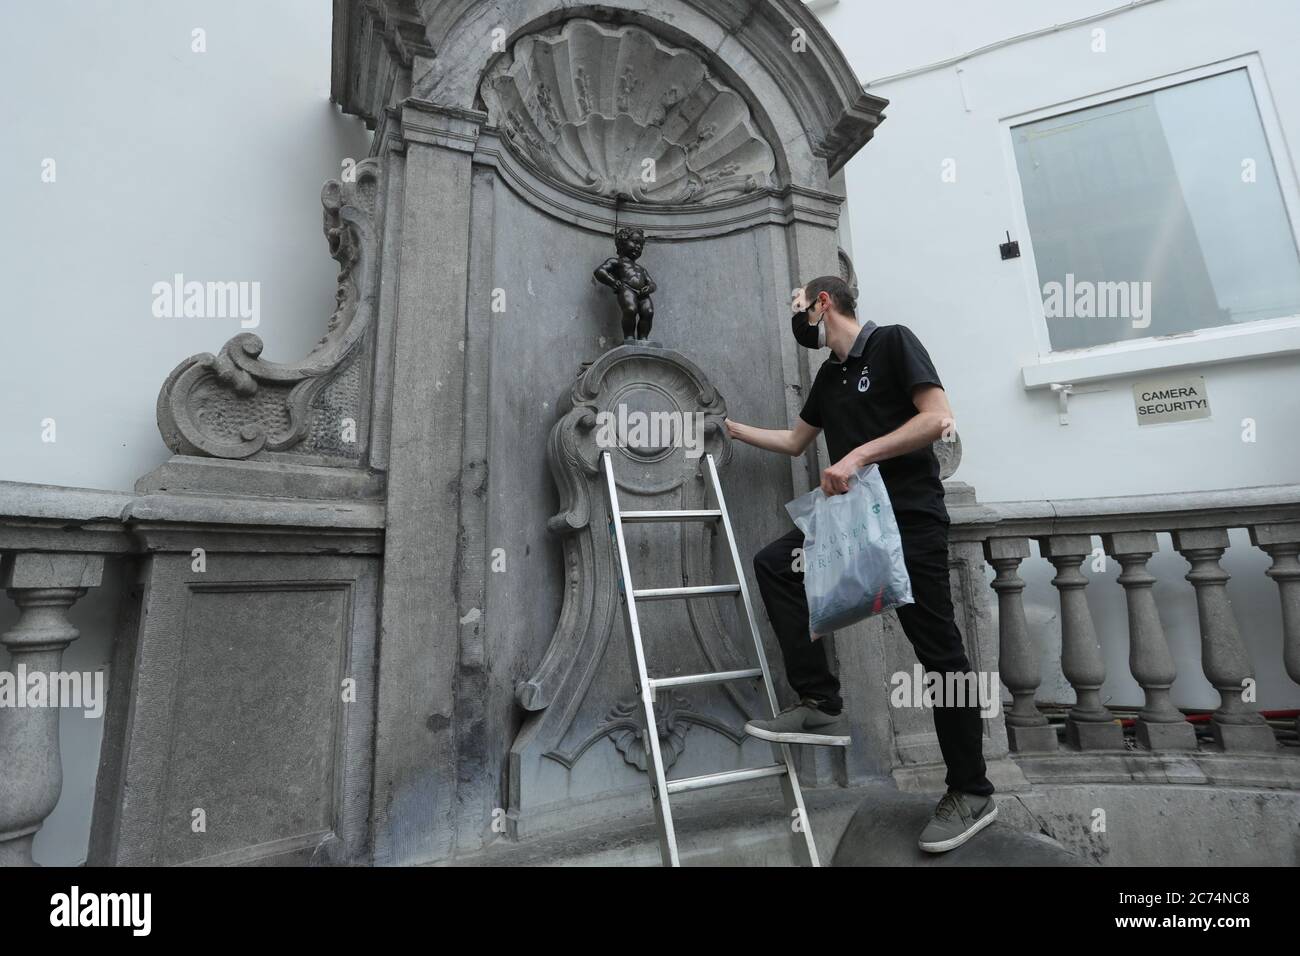 Brussels, Belgium. 14th July, 2020. An official dresser prepares to dress the Manneken-Pis up in Brussels, Belgium, July 14, 2020. Manneken-Pis, the symbol of Brussels folklore, gets costumes at major events. He wore a suit with beret and baguette on Tuesday to commemorate the French national day which falls on July 14 every year. Credit: Zheng Huansong/Xinhua/Alamy Live News Stock Photo